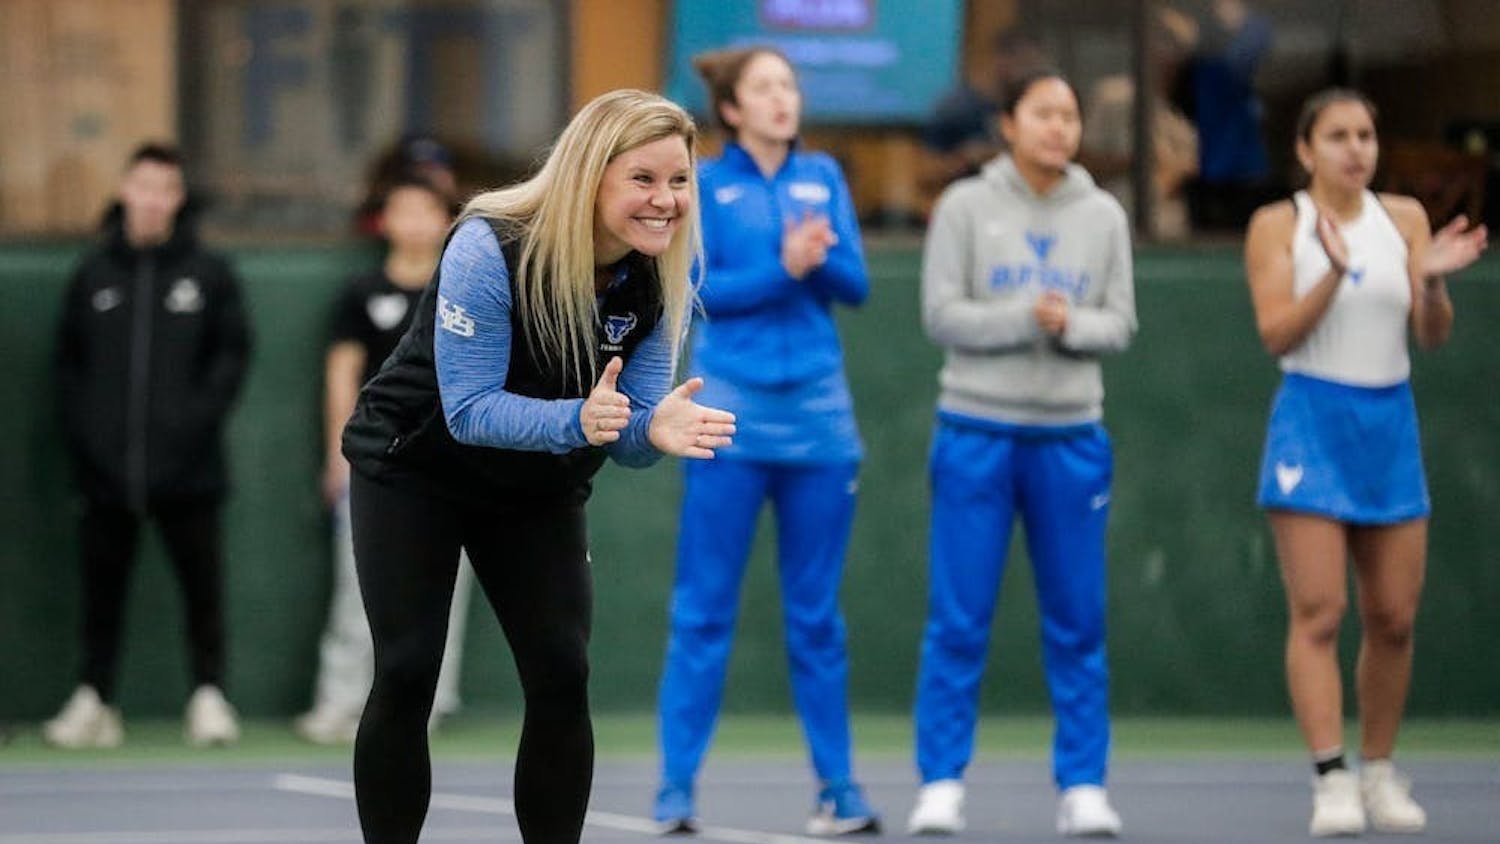 UB women's tennis coach Kristen Maines spoke with The Spectrum about her team-building philosophy.